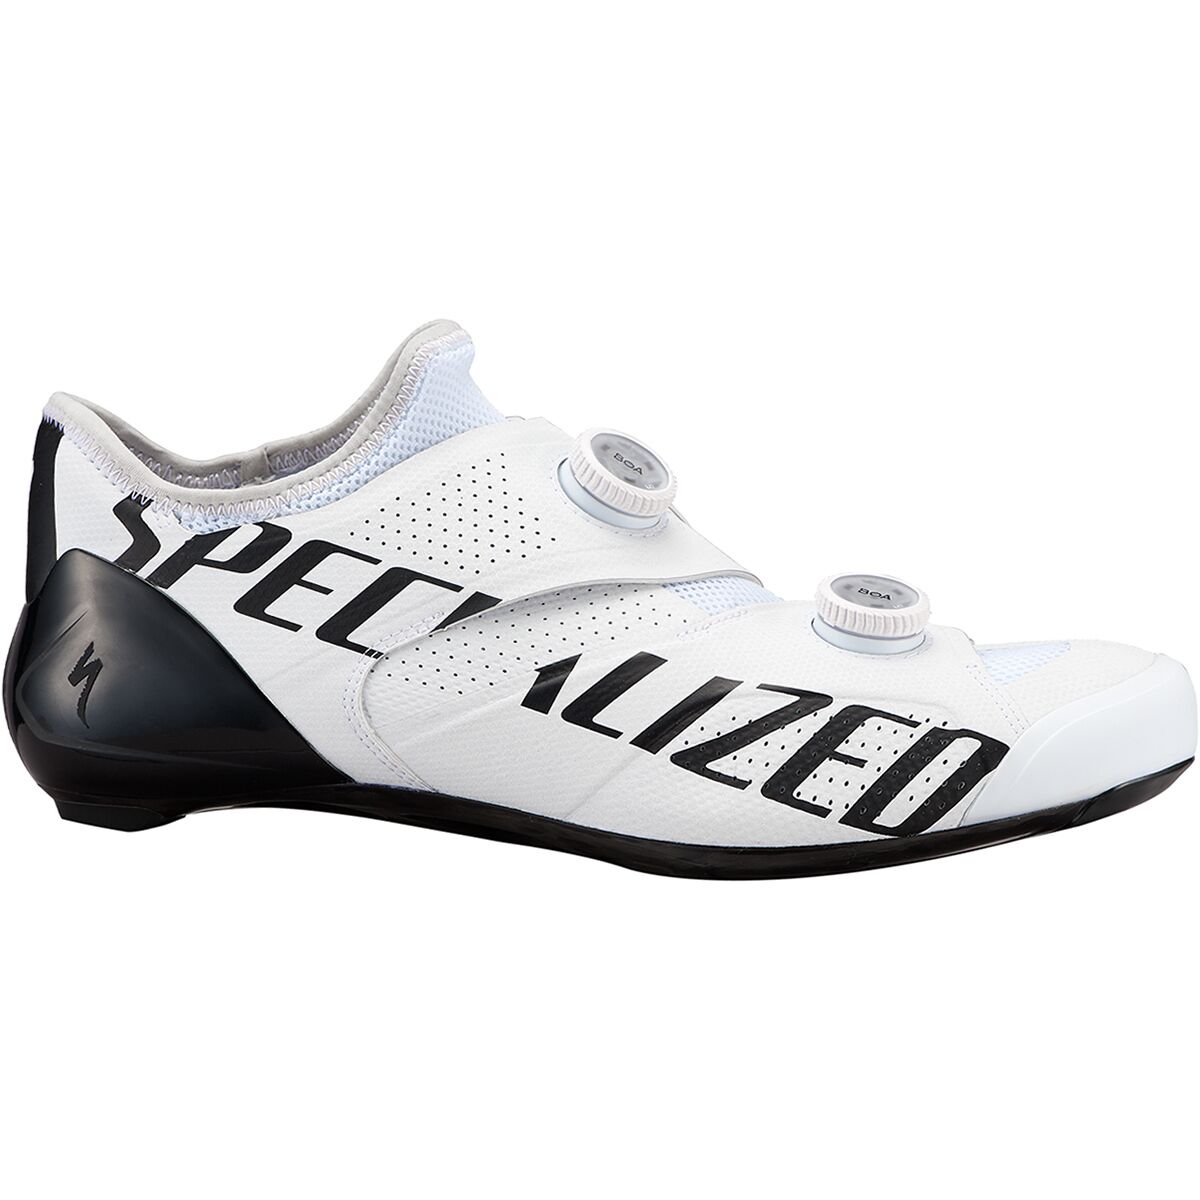 Specialized S-Works Ares Road Shoe - Men